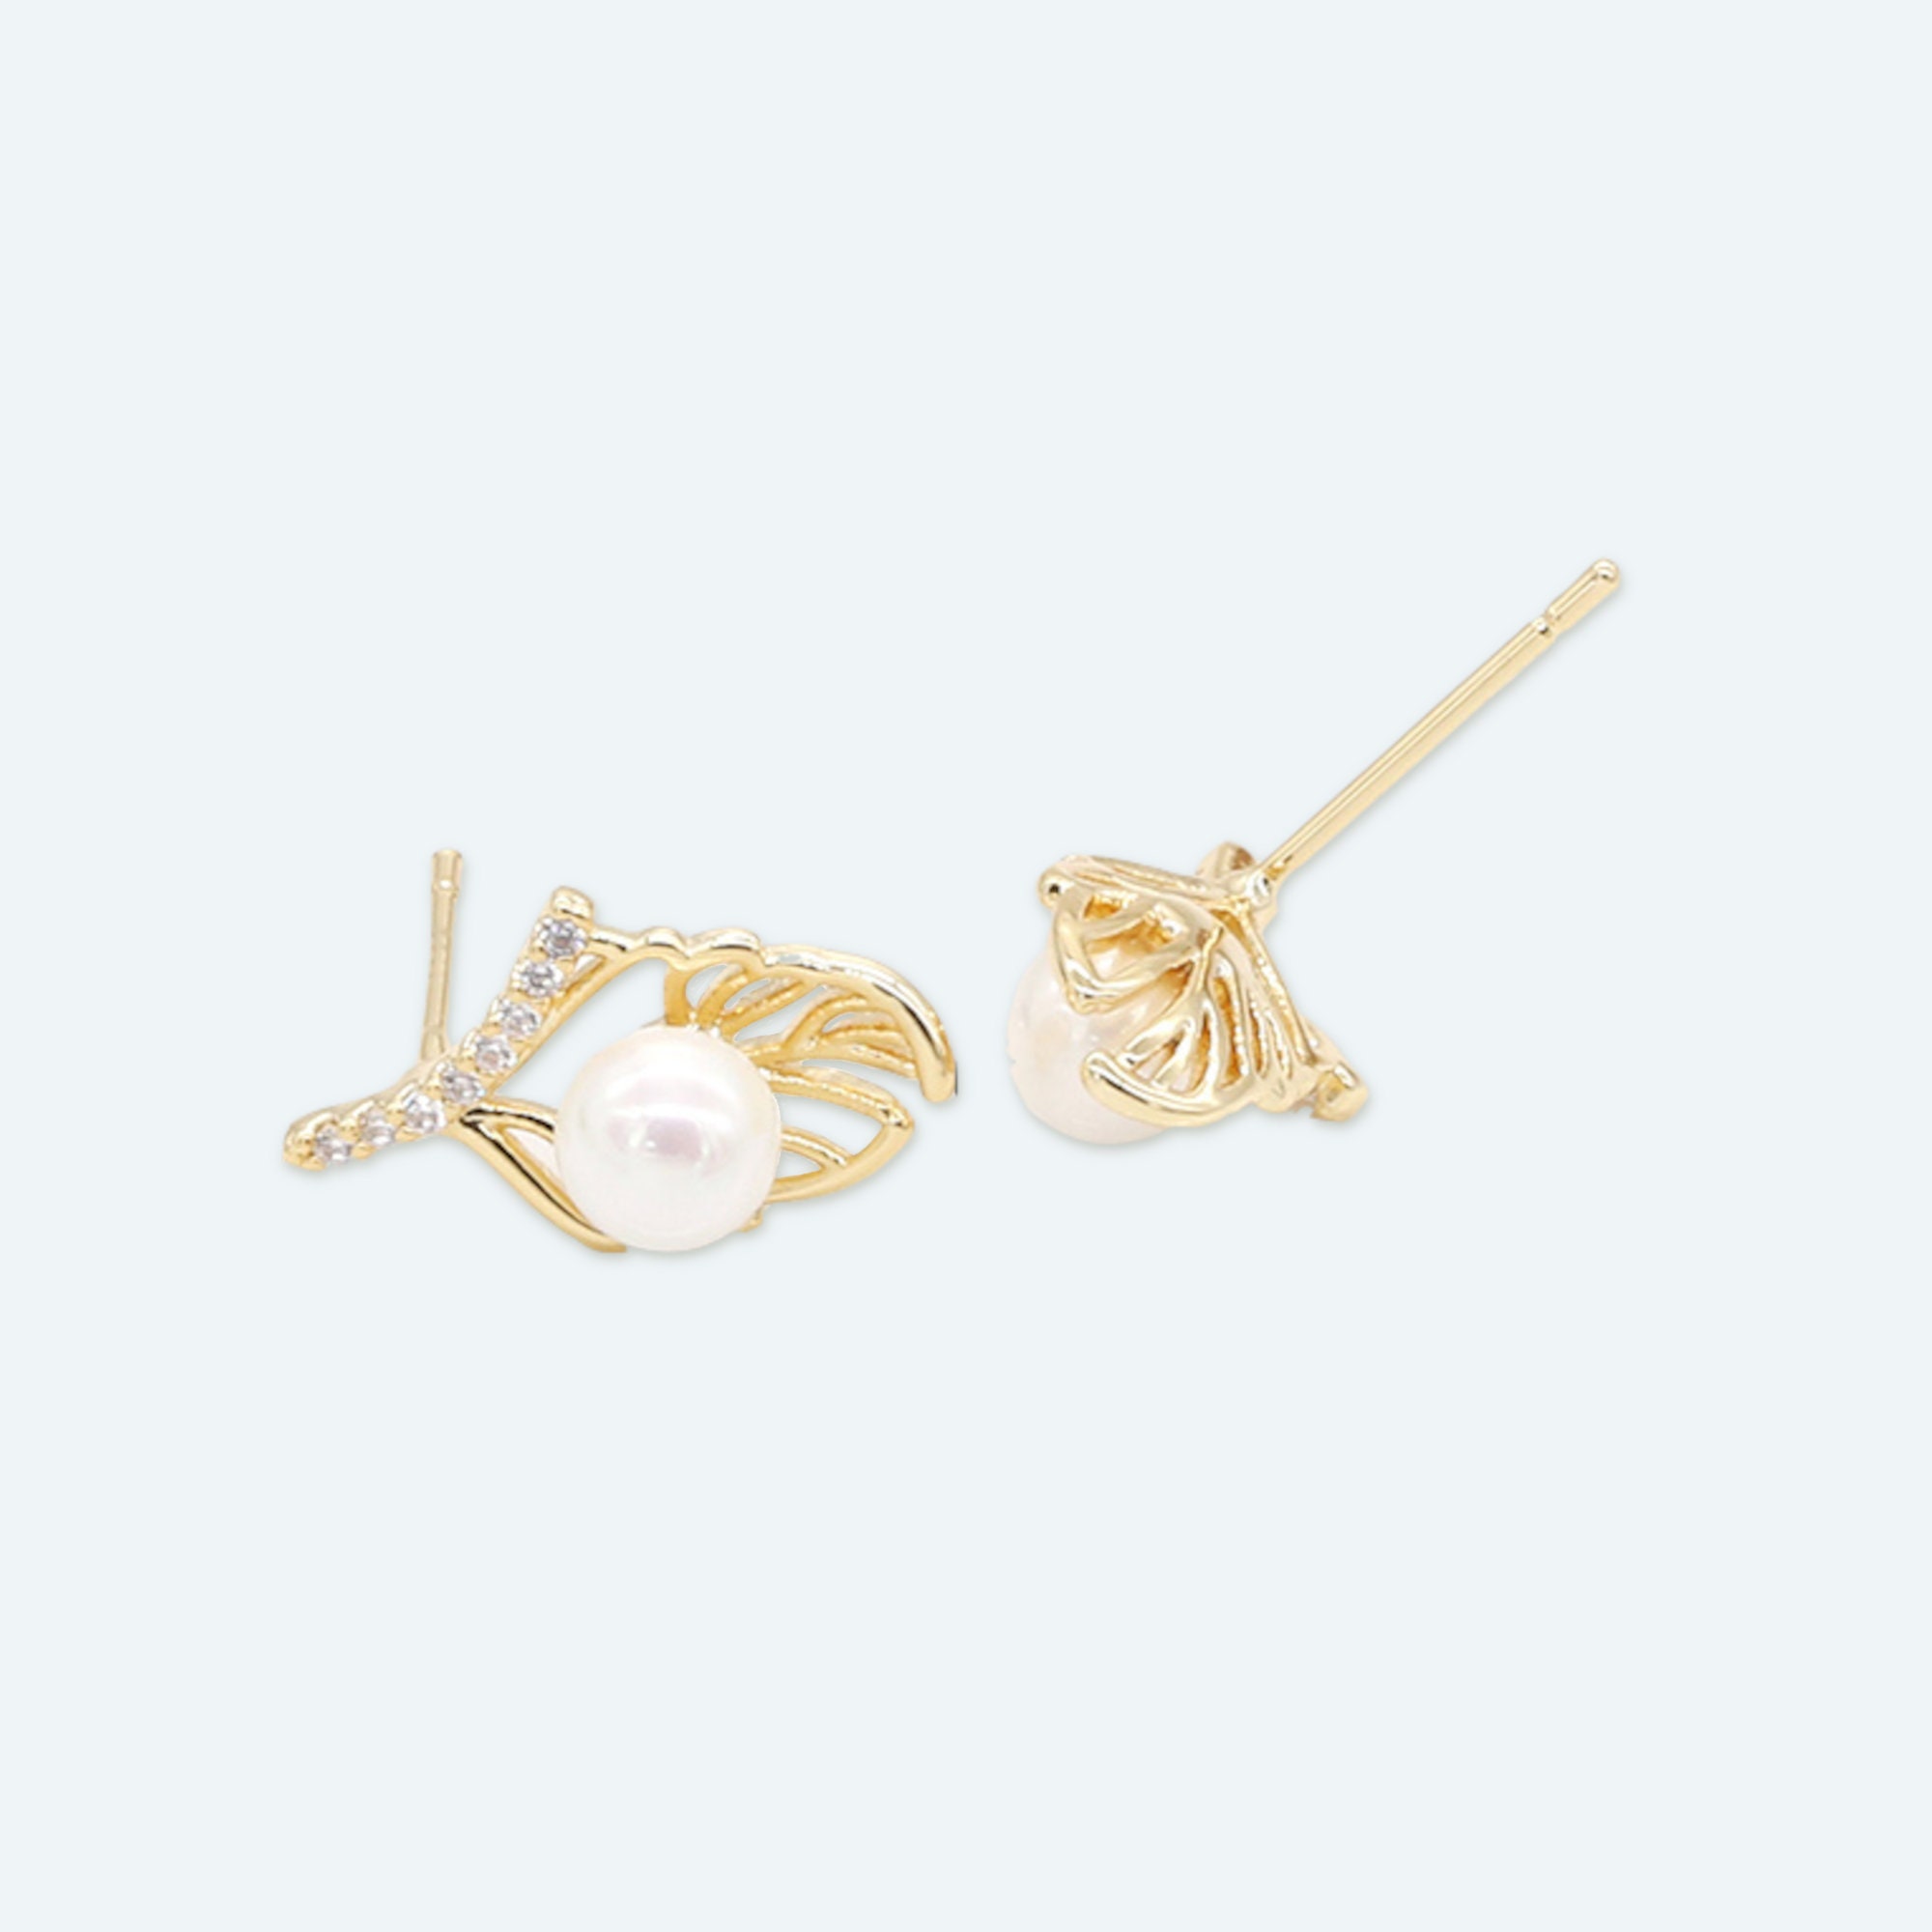 1 Pair 15x10mm Wholesale Gold Plated Leaf Stud Earrings with Faux Pearl and Micro Pave Cubic Zirconia